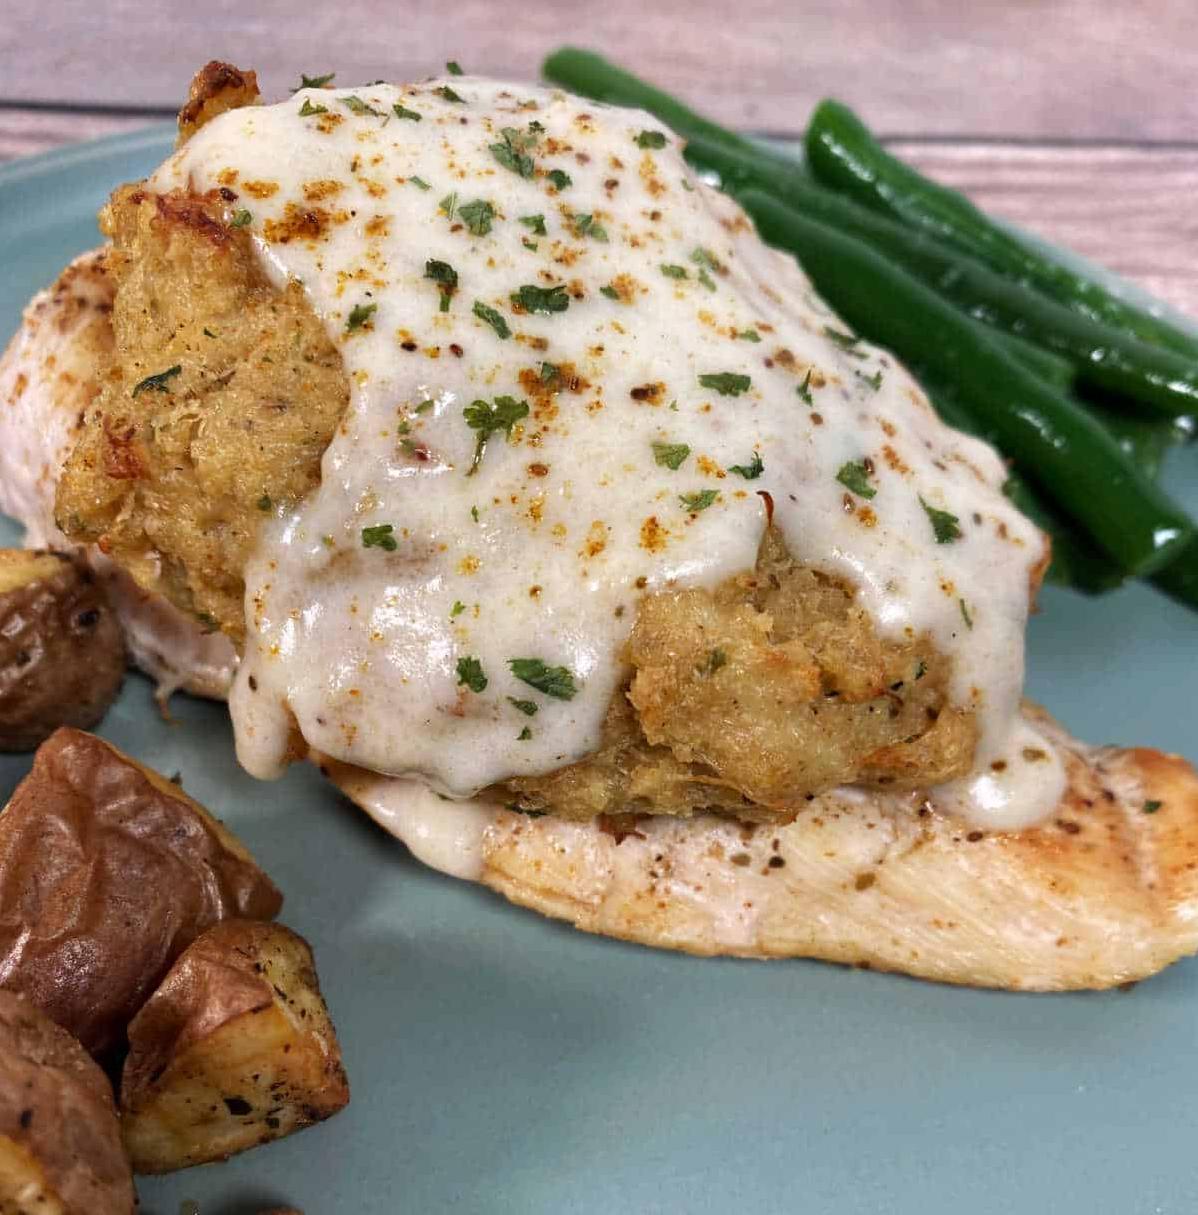  This Chesapeake Bay Style Chicken will have your mouth watering before it’s even cooked!